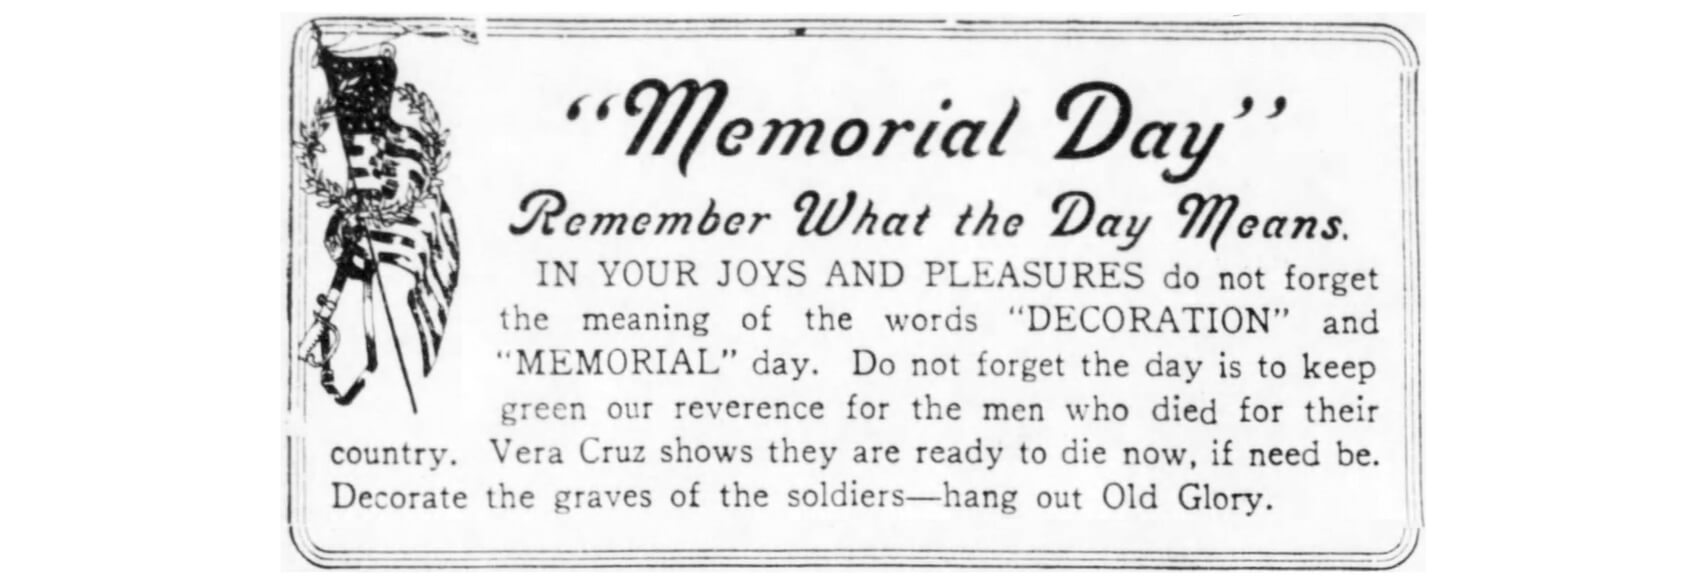 memorial day brooklyn decoration day history